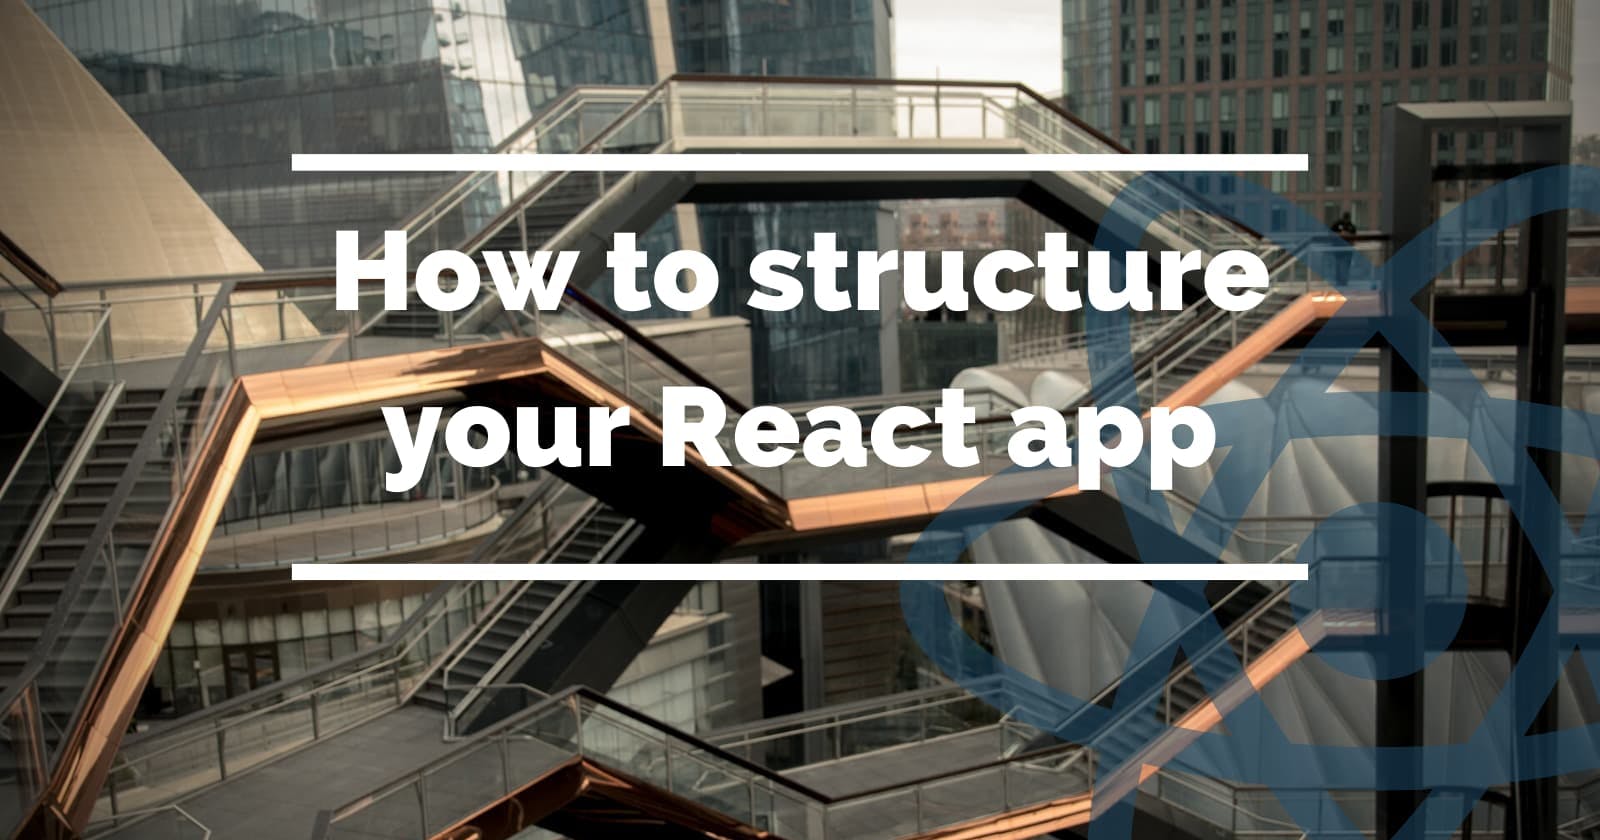 How to structure your React app